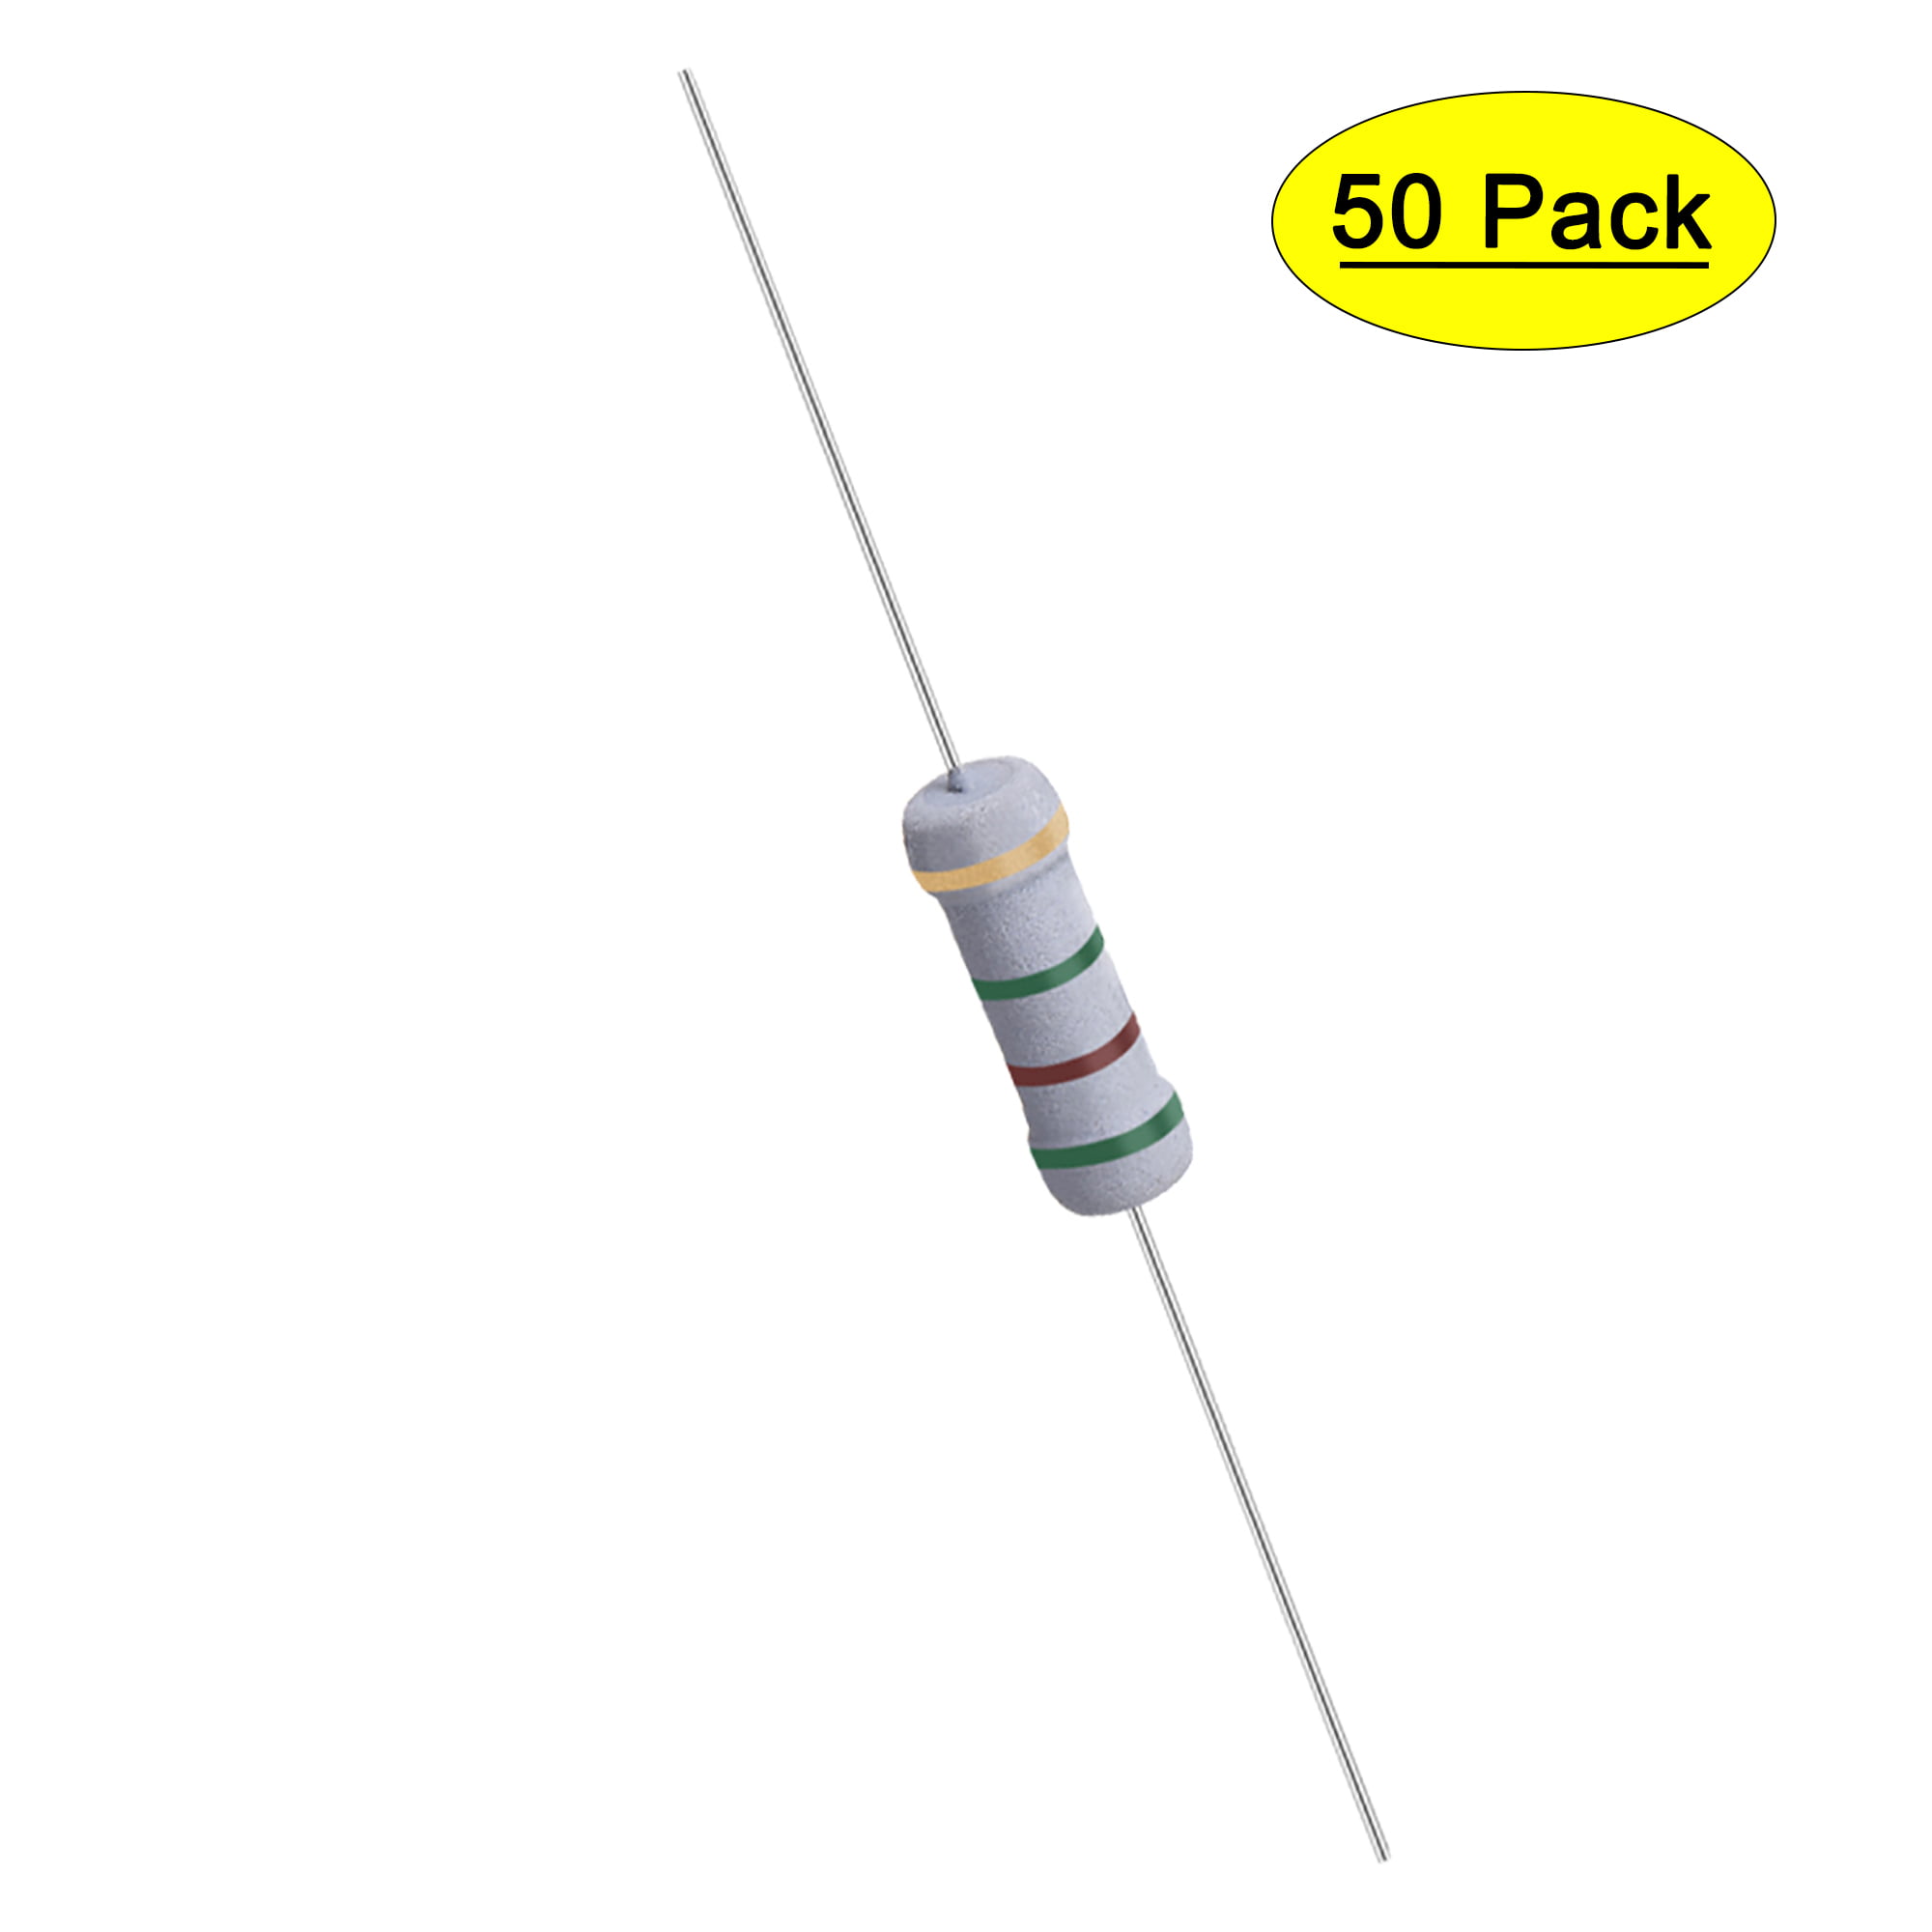 Axial Lead 680K Ohm Resistance for DIY Electronic Projects and Experiments 1W 5% Tolerance uxcell 50 Pcs Metal Oxide Film Resistor Flame Proof 